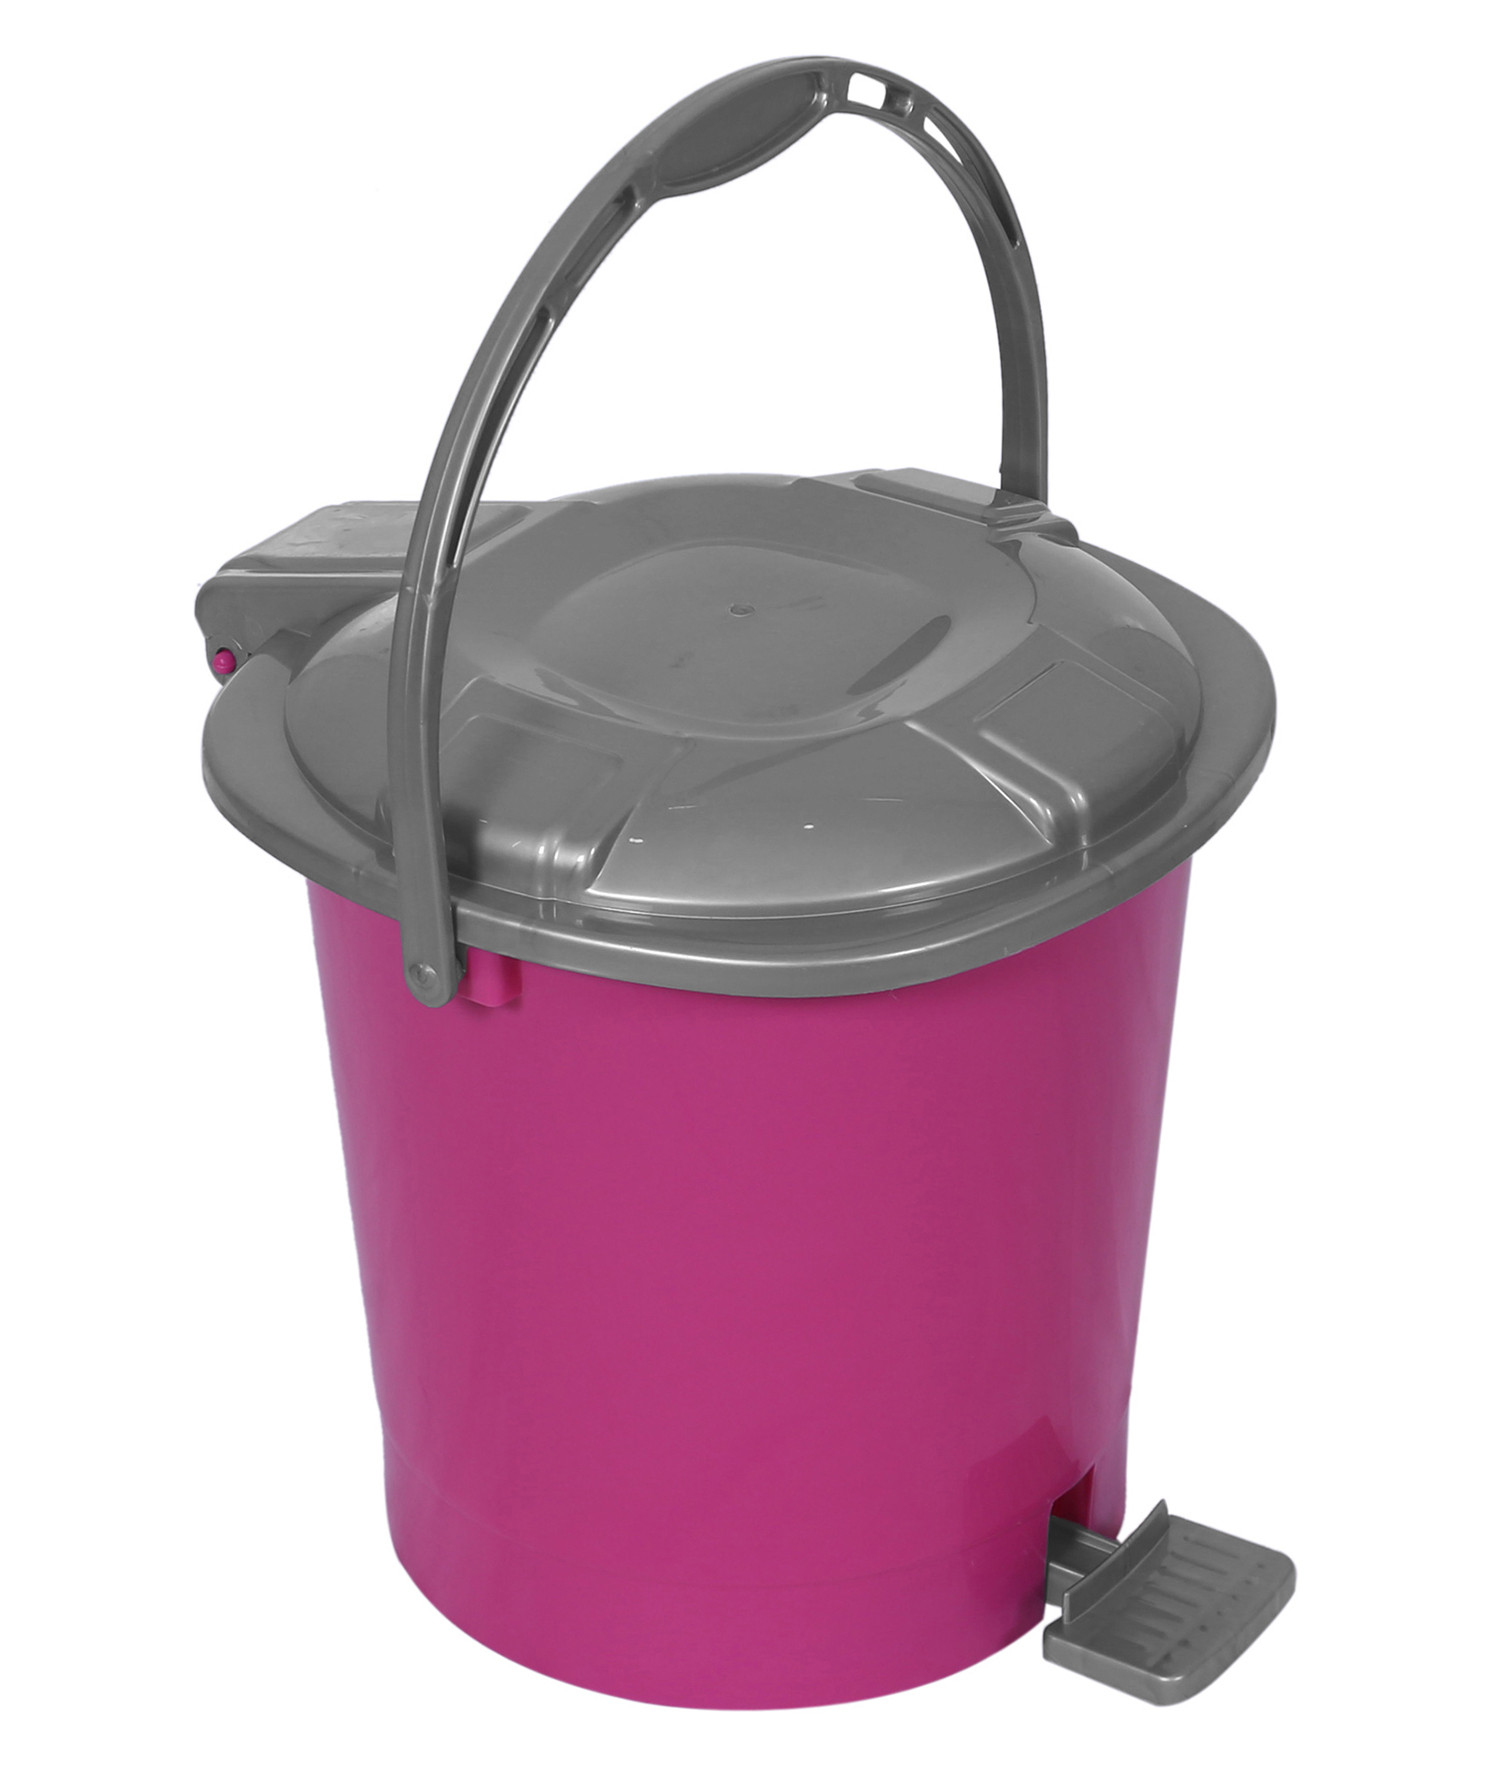 Kuber Industries Durable Plastic Pedal Dustbin|Waste Bin|Trash Can For Kitchen & Home With Handle,10 Litre,Pack of 2 (Red & Pink)